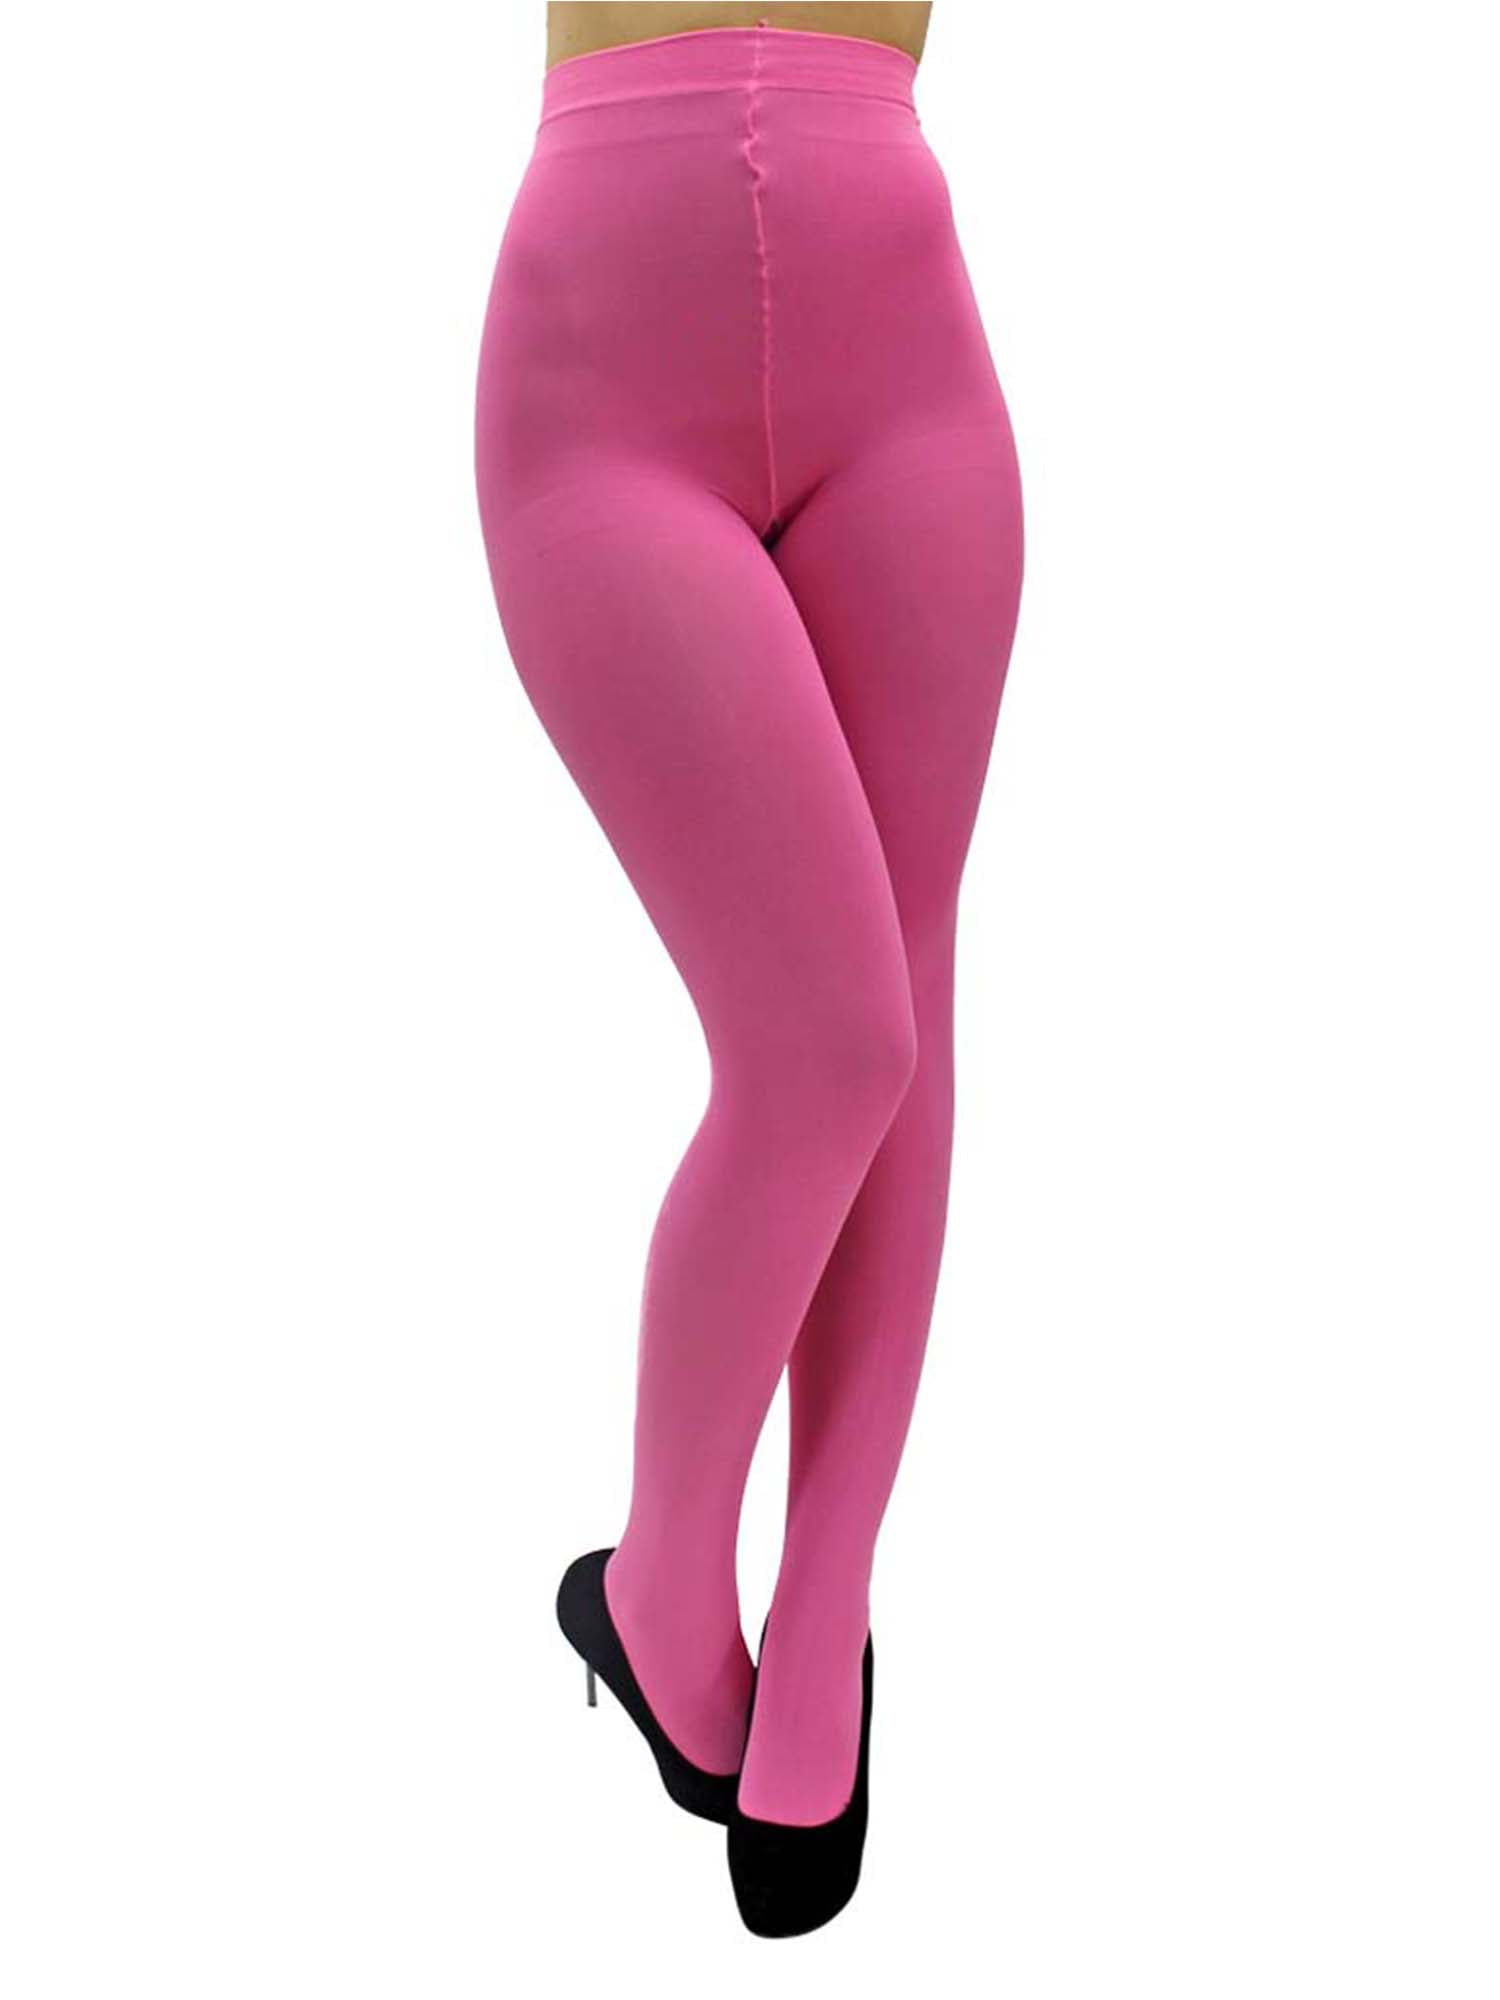 Opaque Hot Pink Stretchy Pantyhose Tights